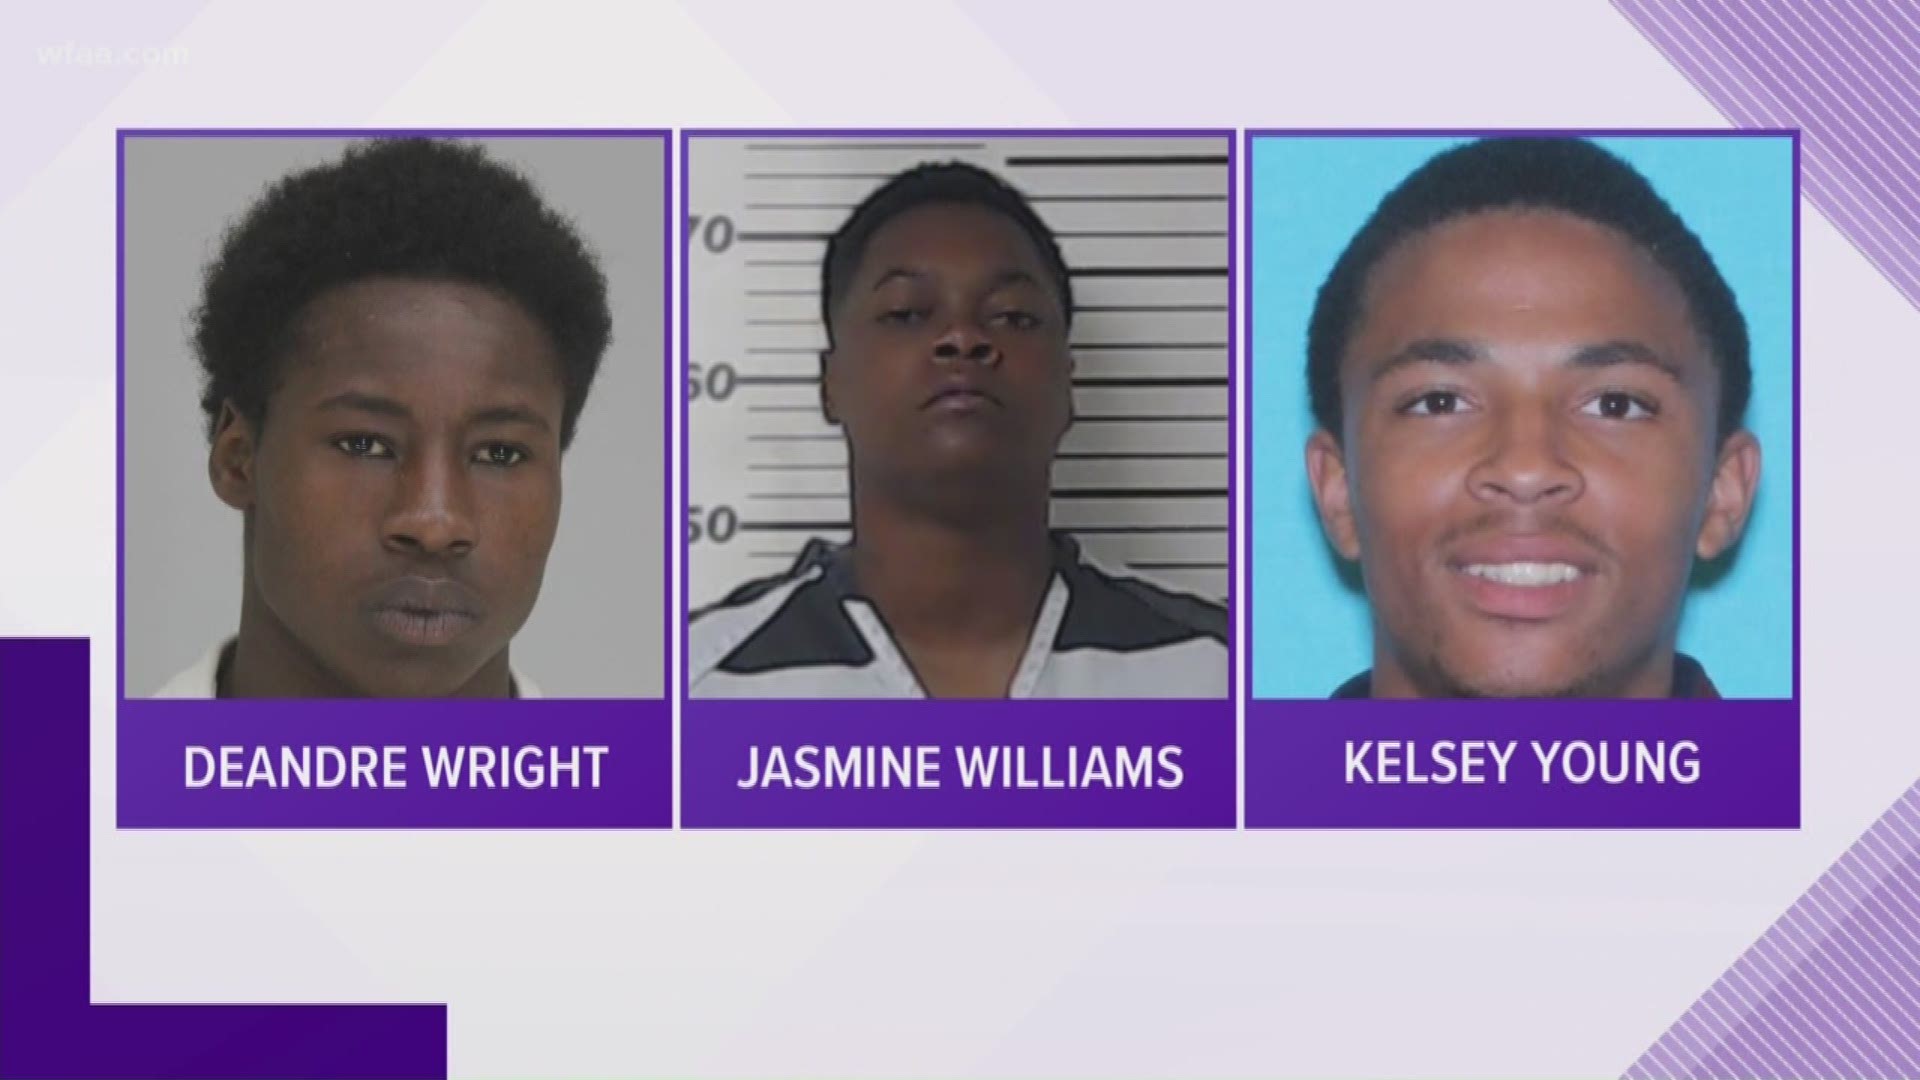 De'Andre Wright and Jasmine Williams have been arrested.